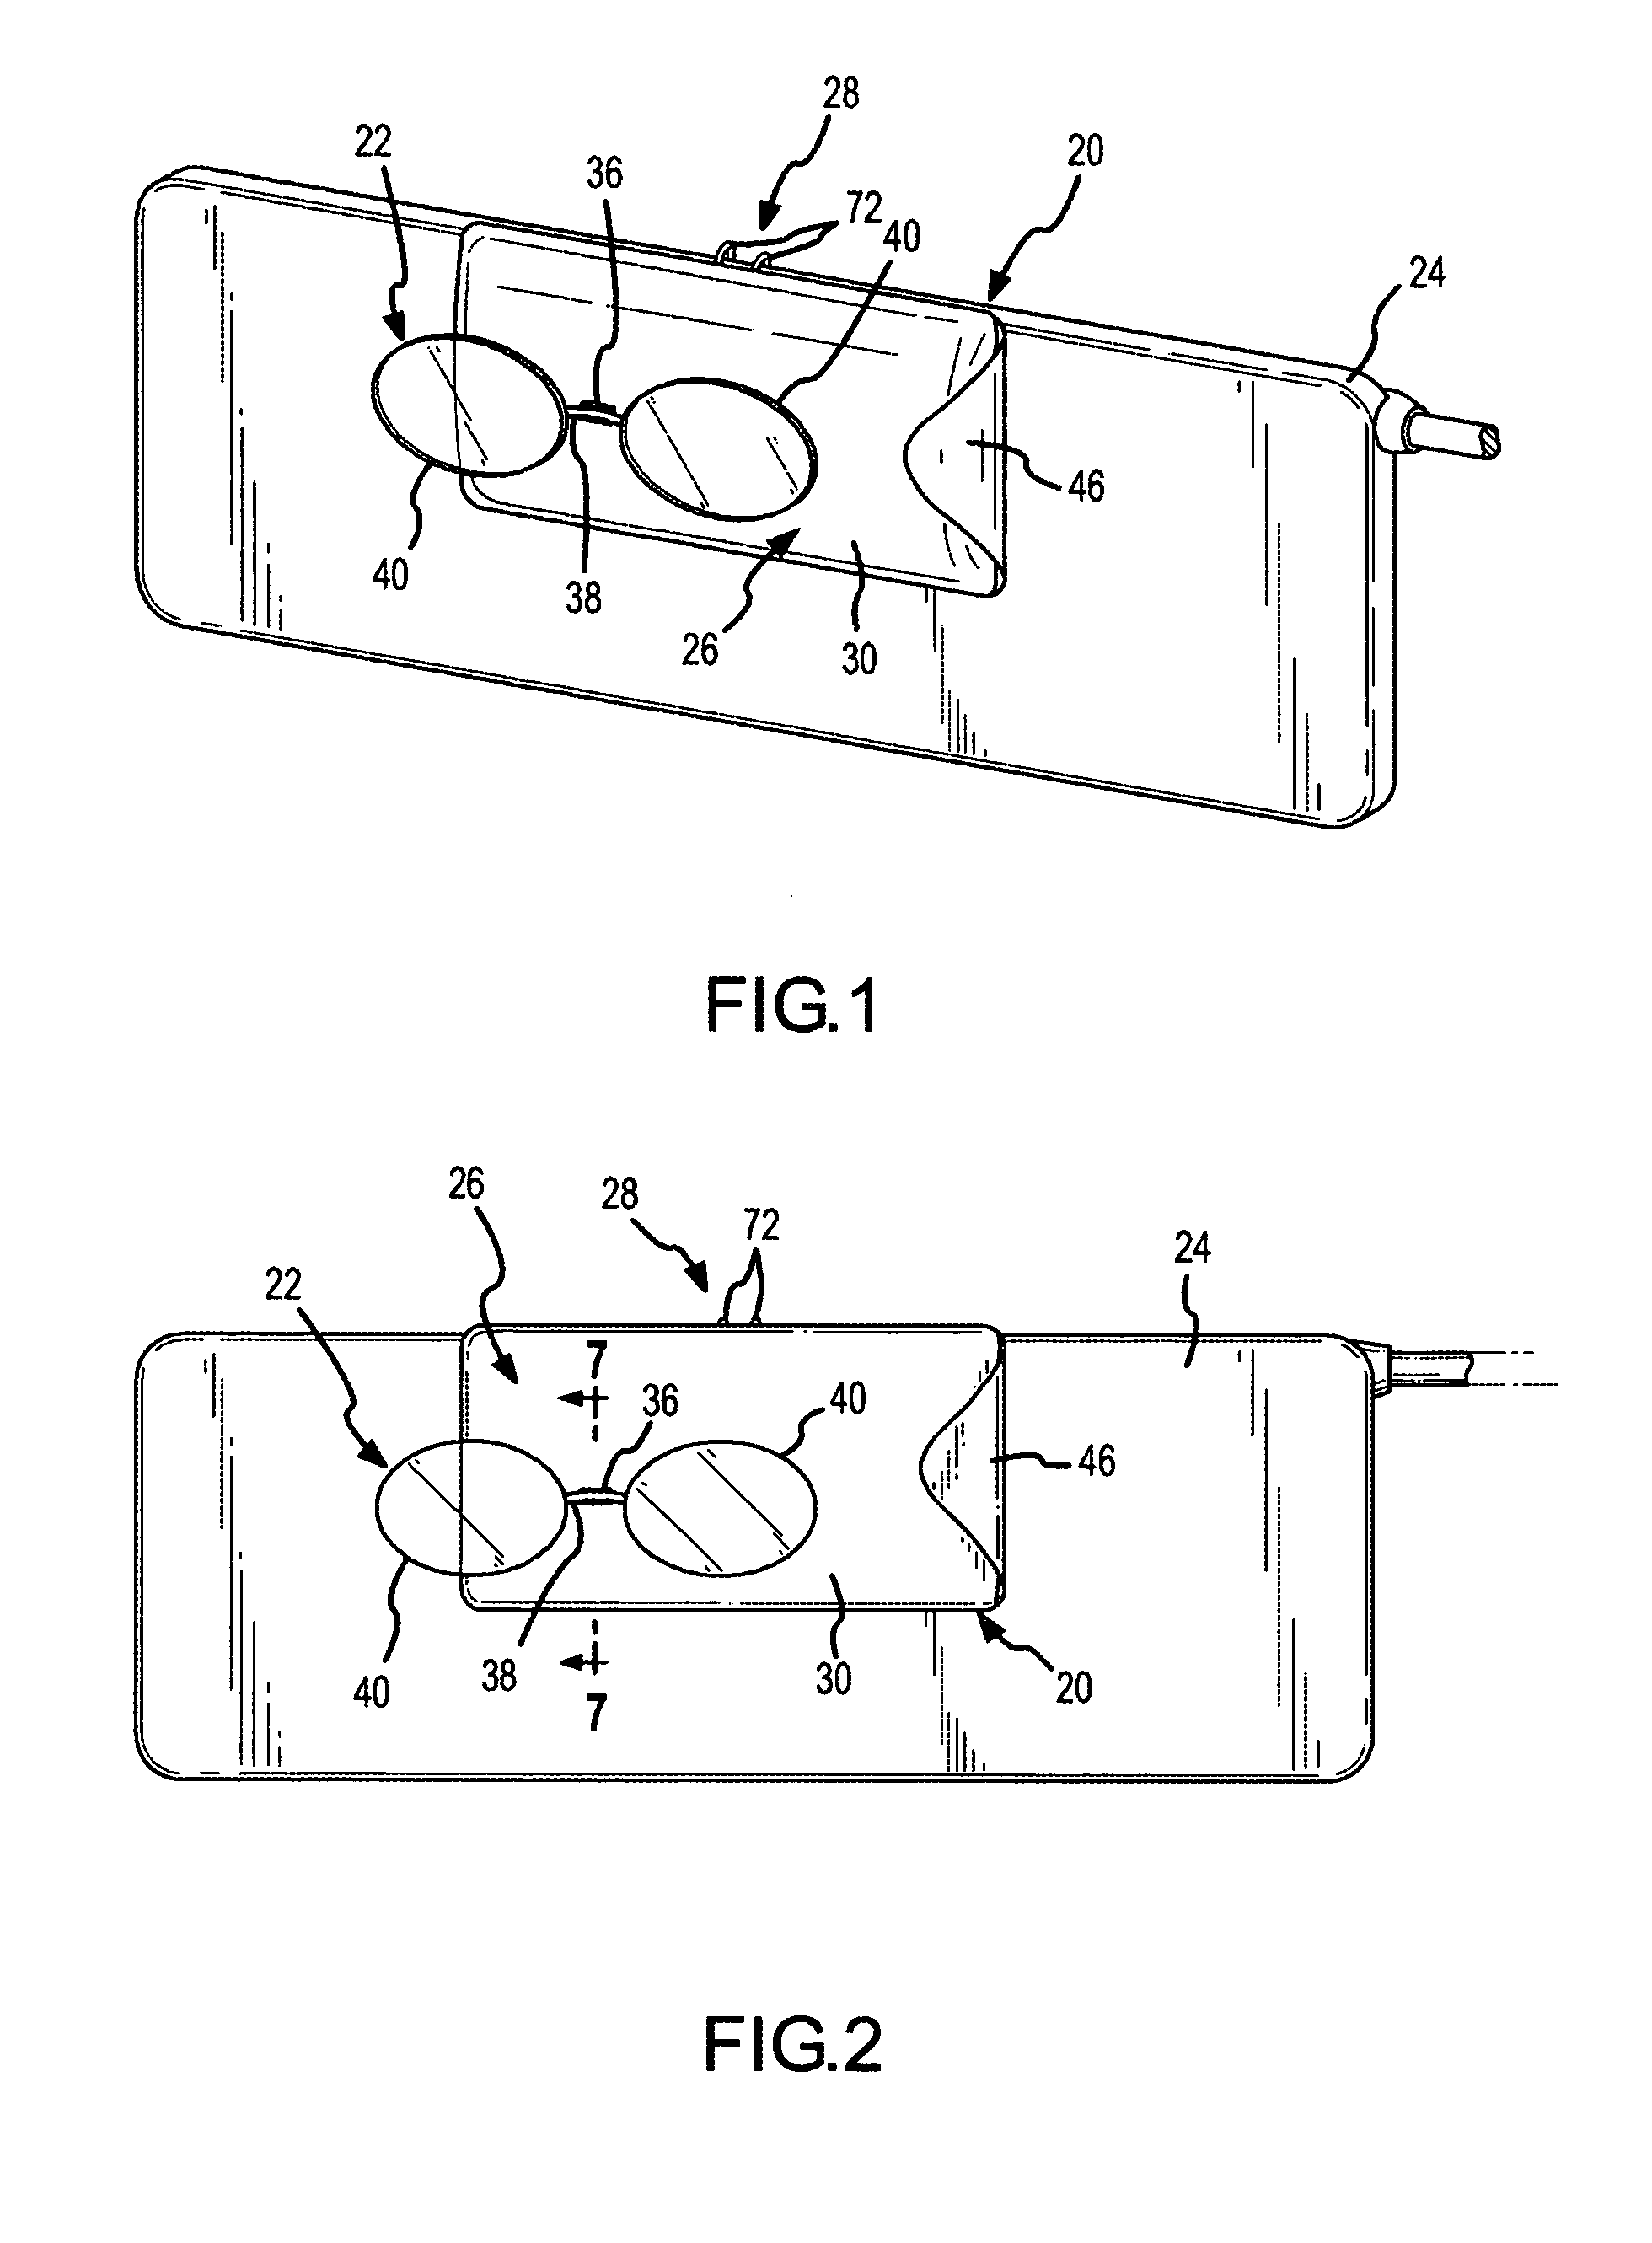 Apparatus and method for retaining and accessing clip-on sunglasses